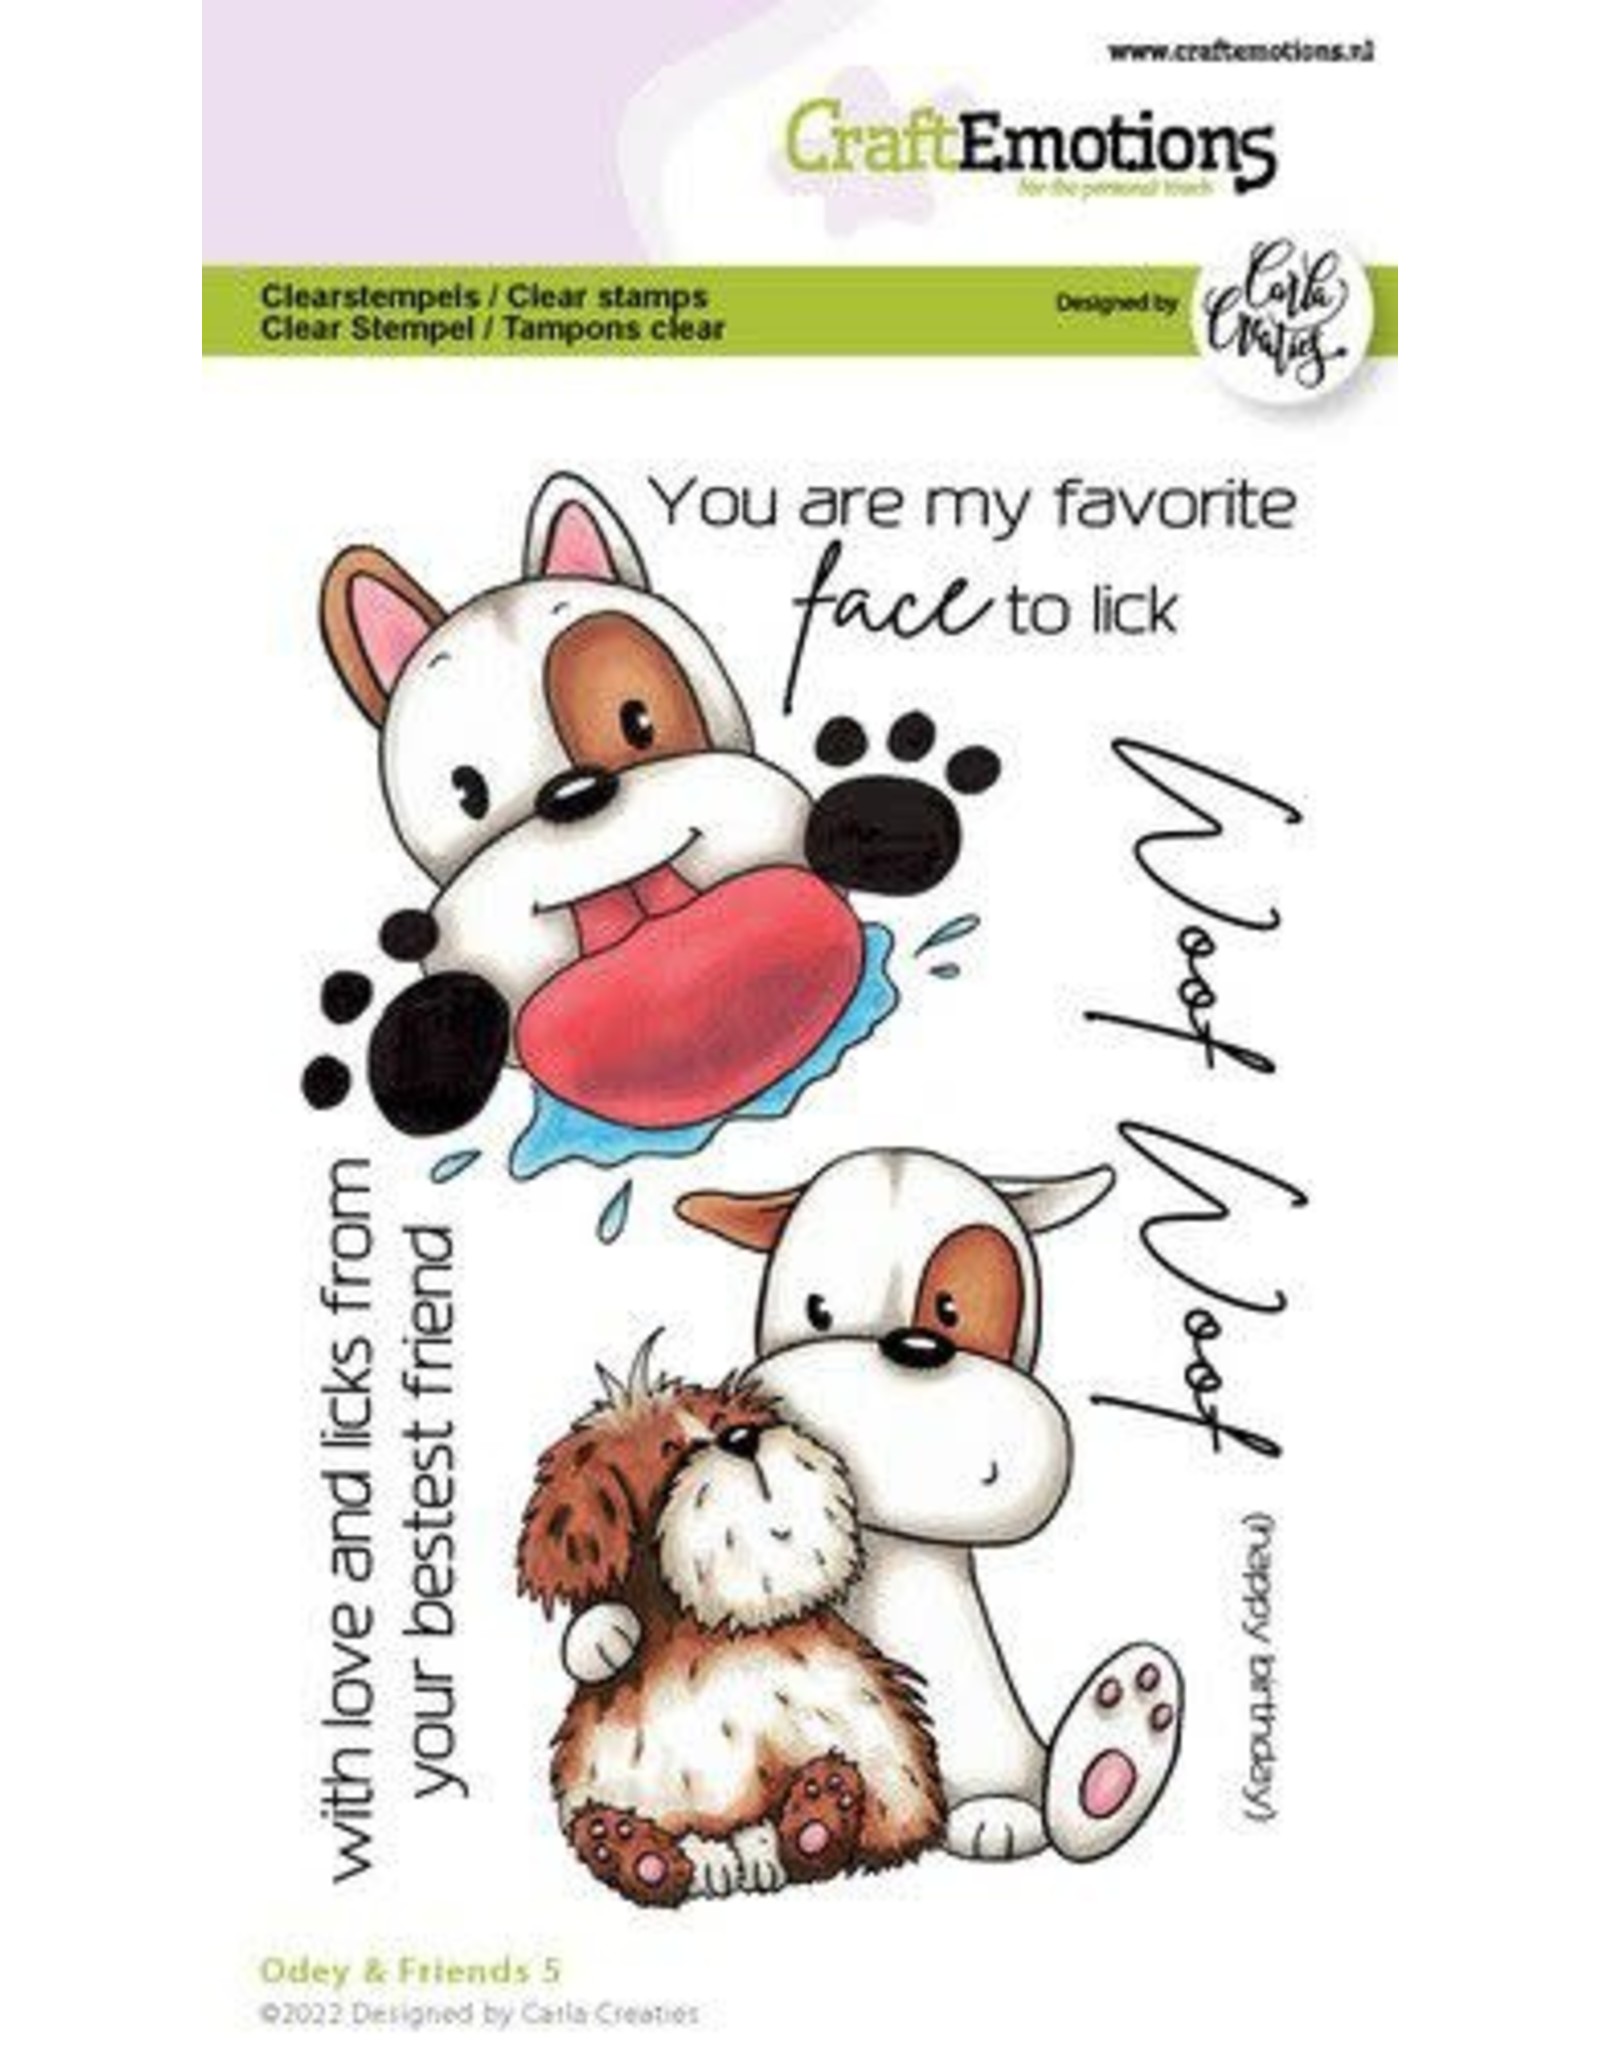 Craft Emotions CraftEmotions clearstamps A6 - Odey & Friends 5 Carla Creaties